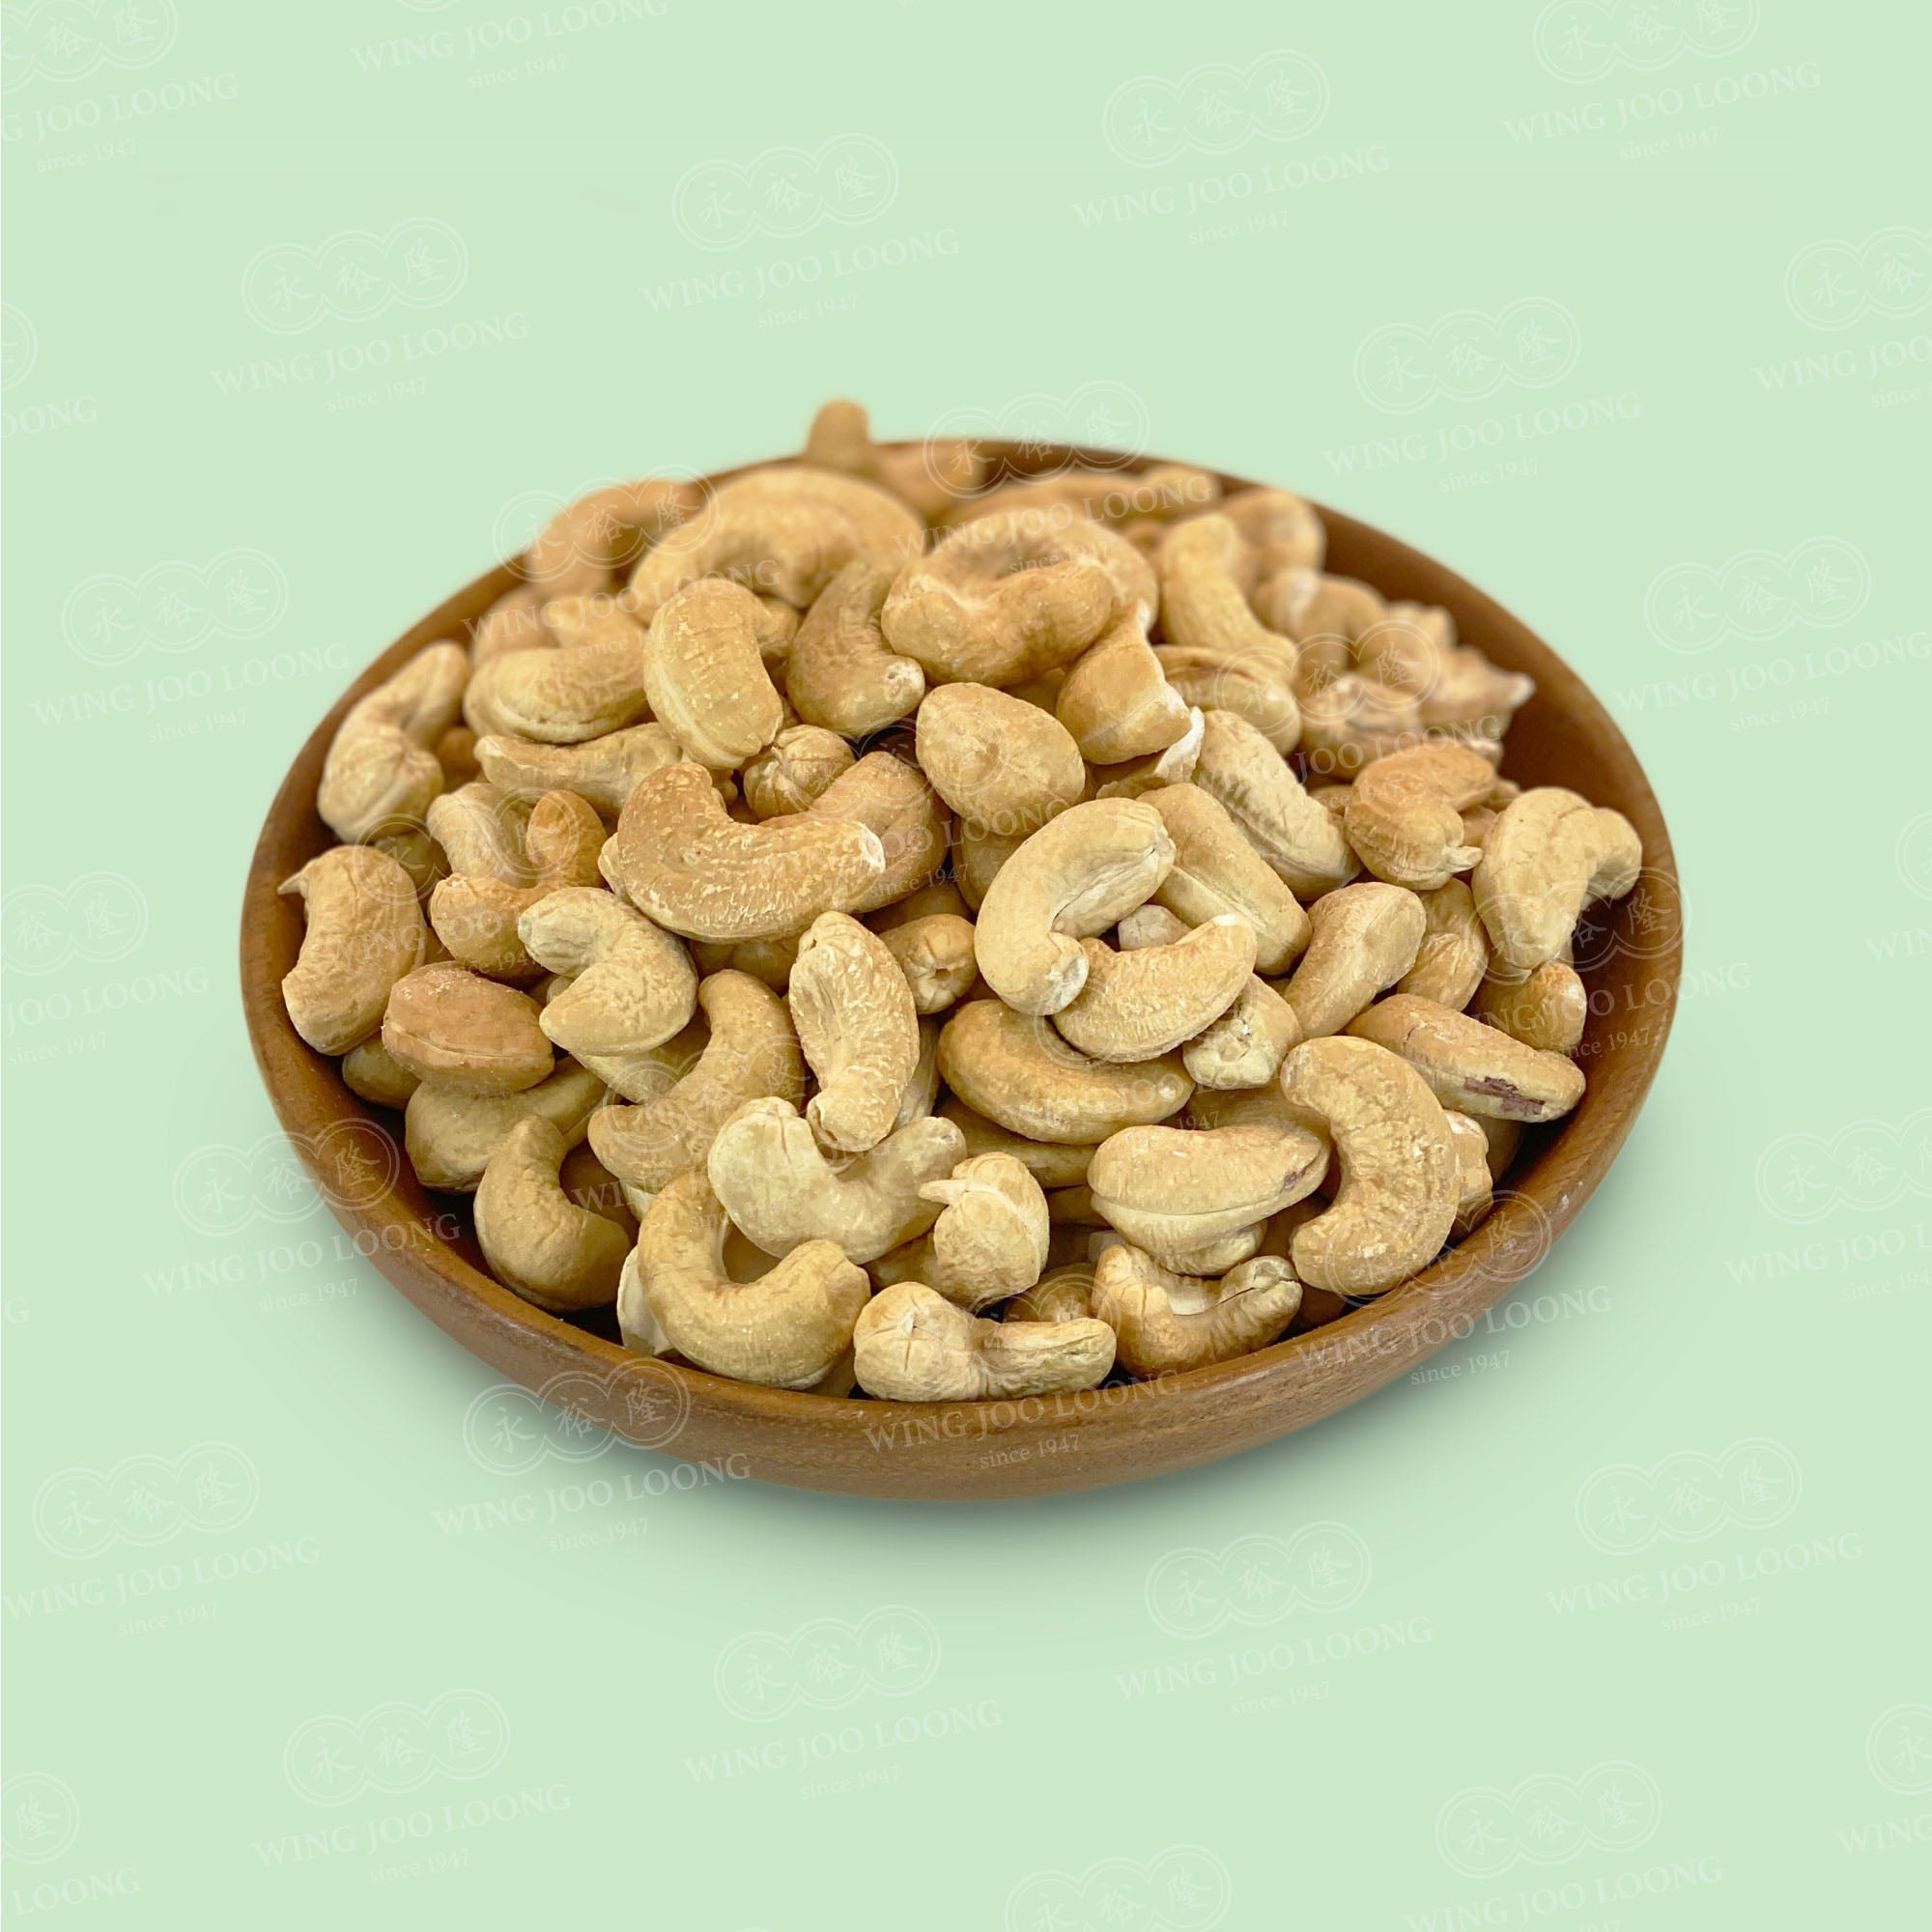 Wing Joo Loong Roasted Cashew Nuts 腰豆